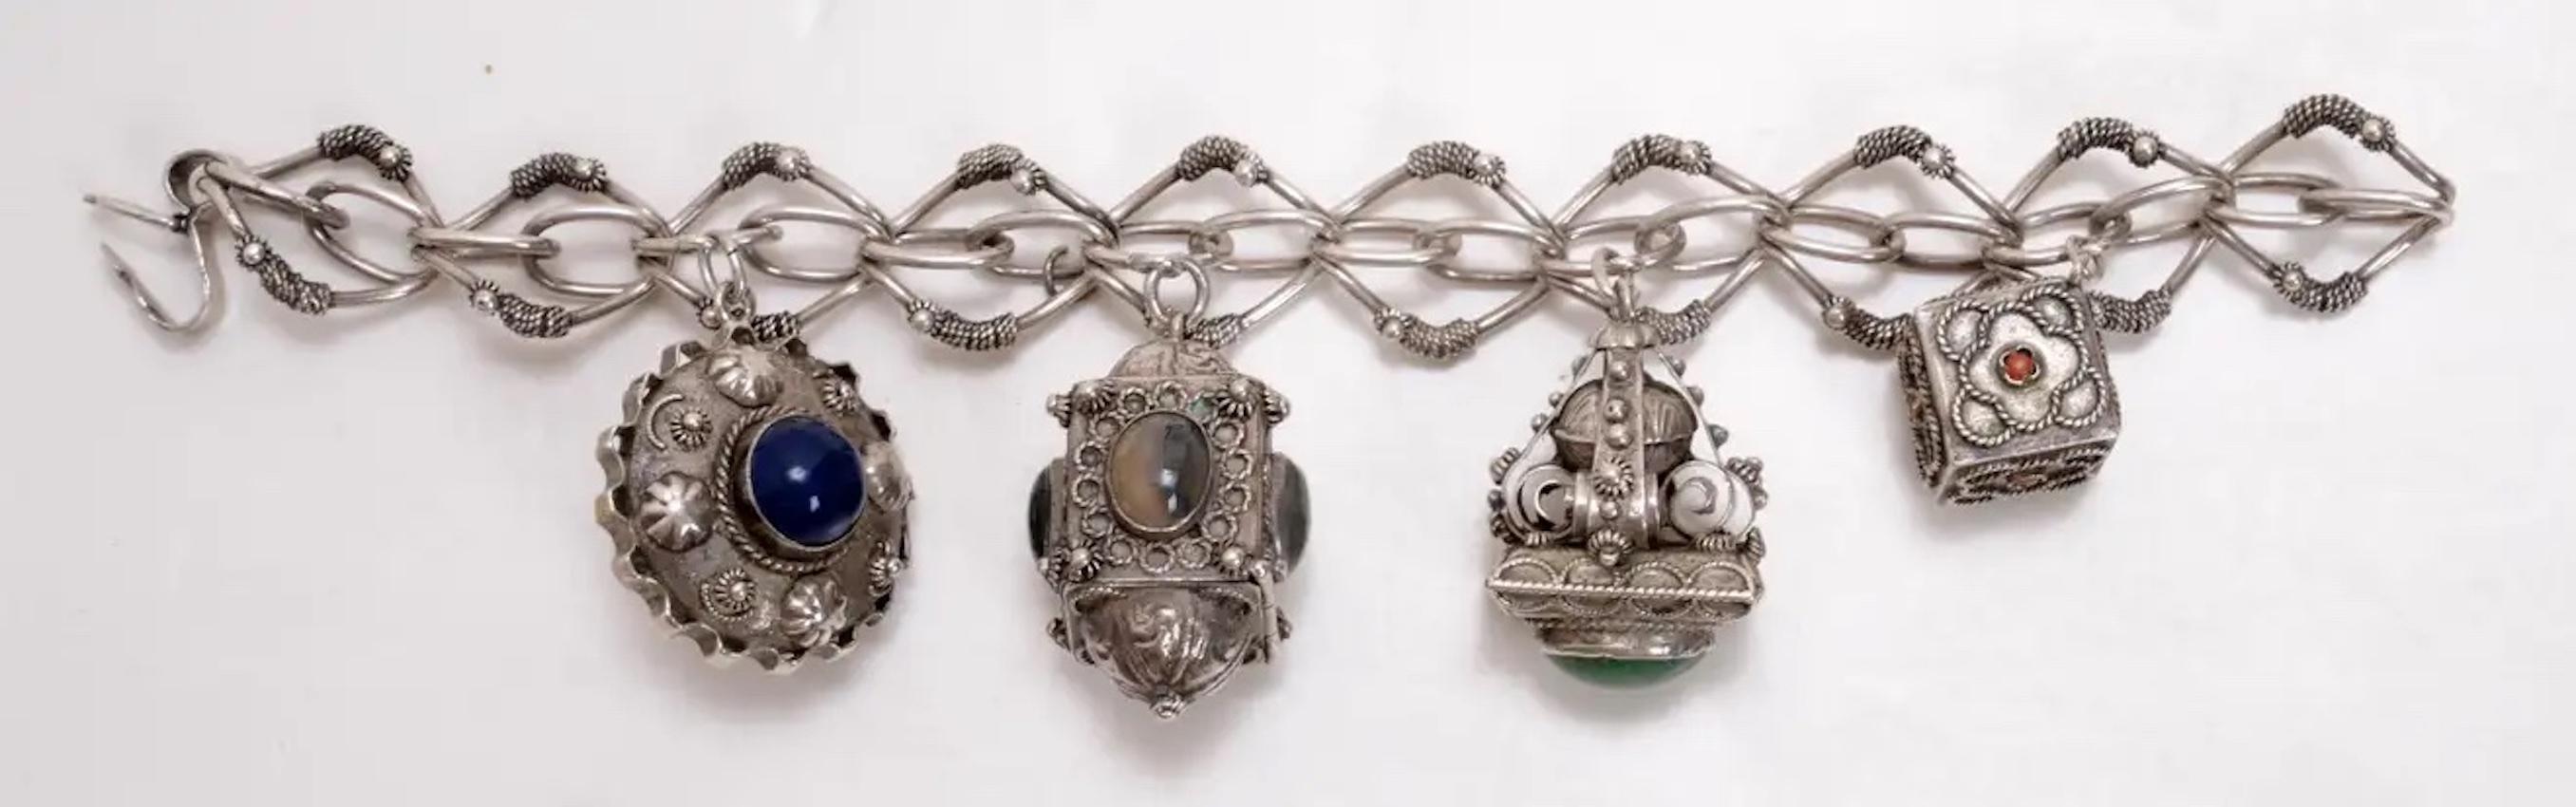 Silver Bracelet, 4 Charms Mounted with Assorted Stones For Sale 5